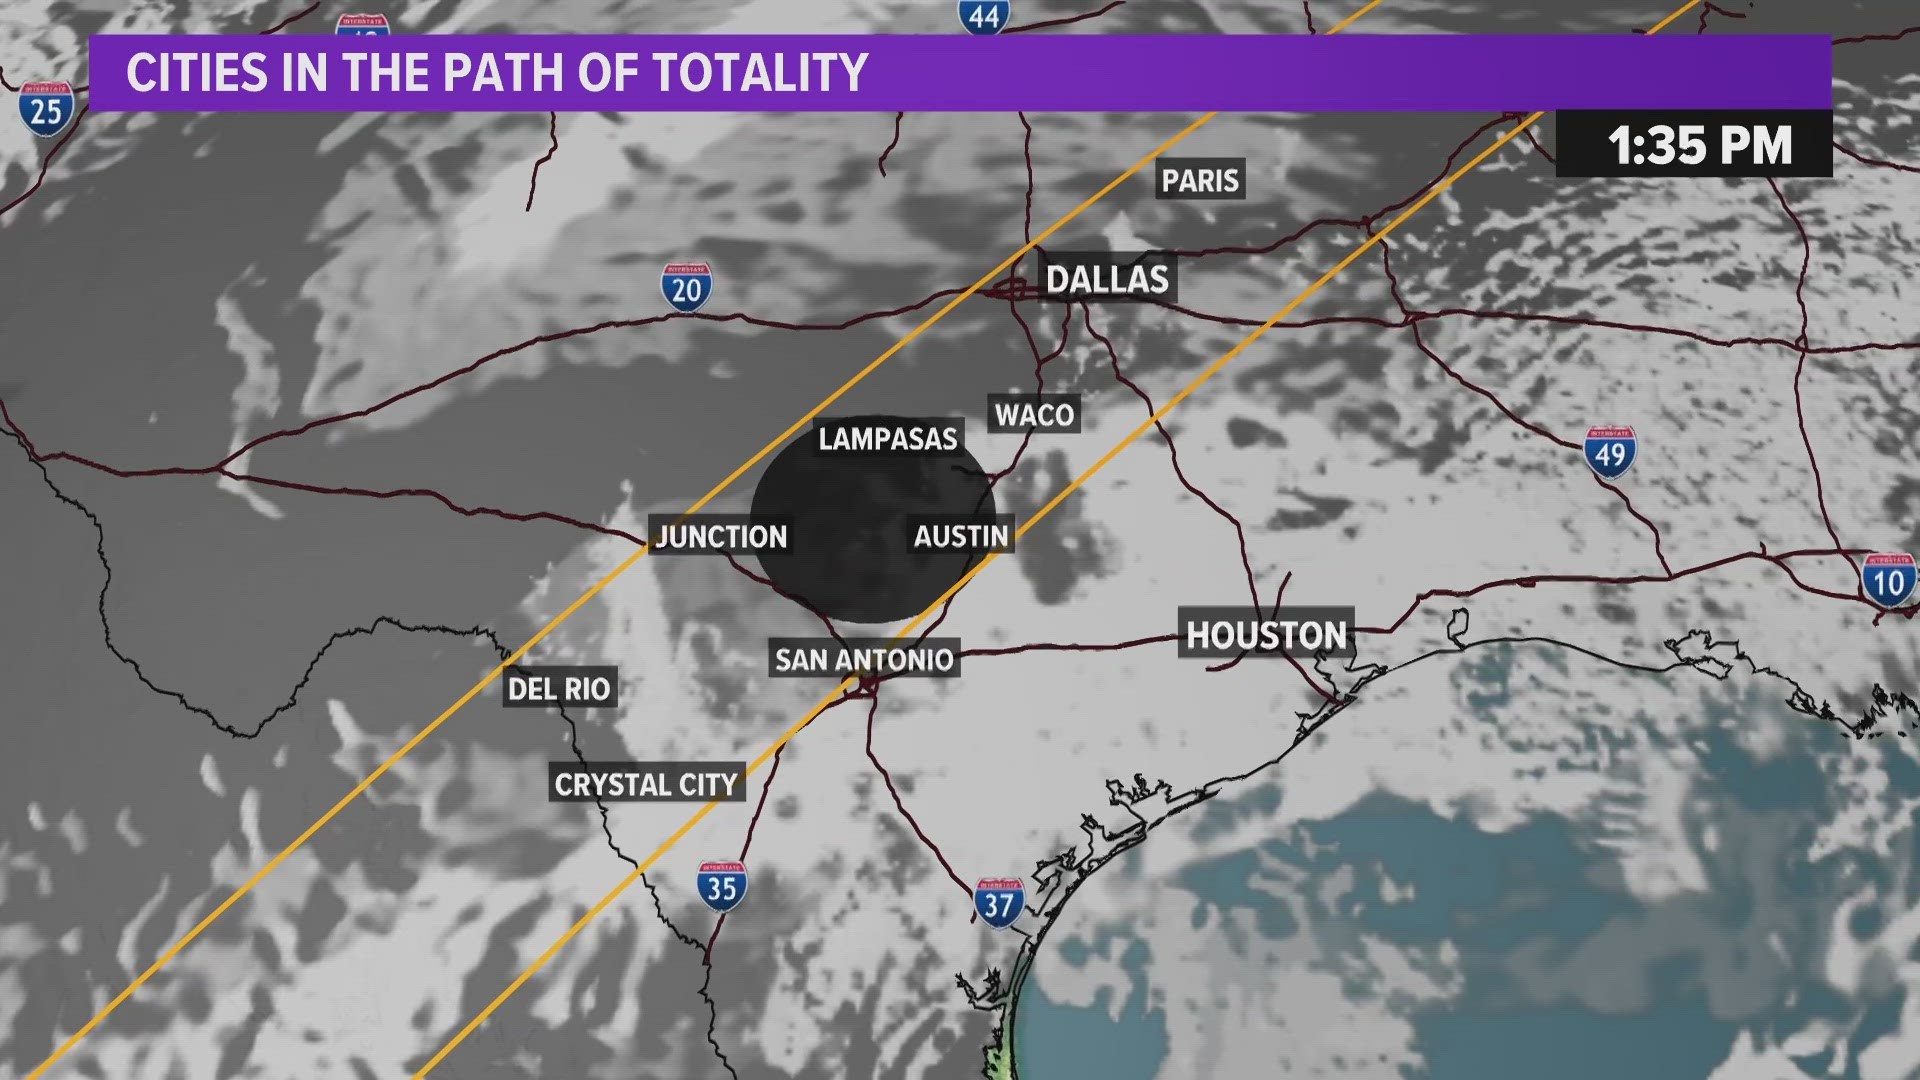 If you have plans to head to the Hill Country, Waco or Dallas to see the solar eclipse, you could be in good shape, according to Meteorologist Pat Cavlin.